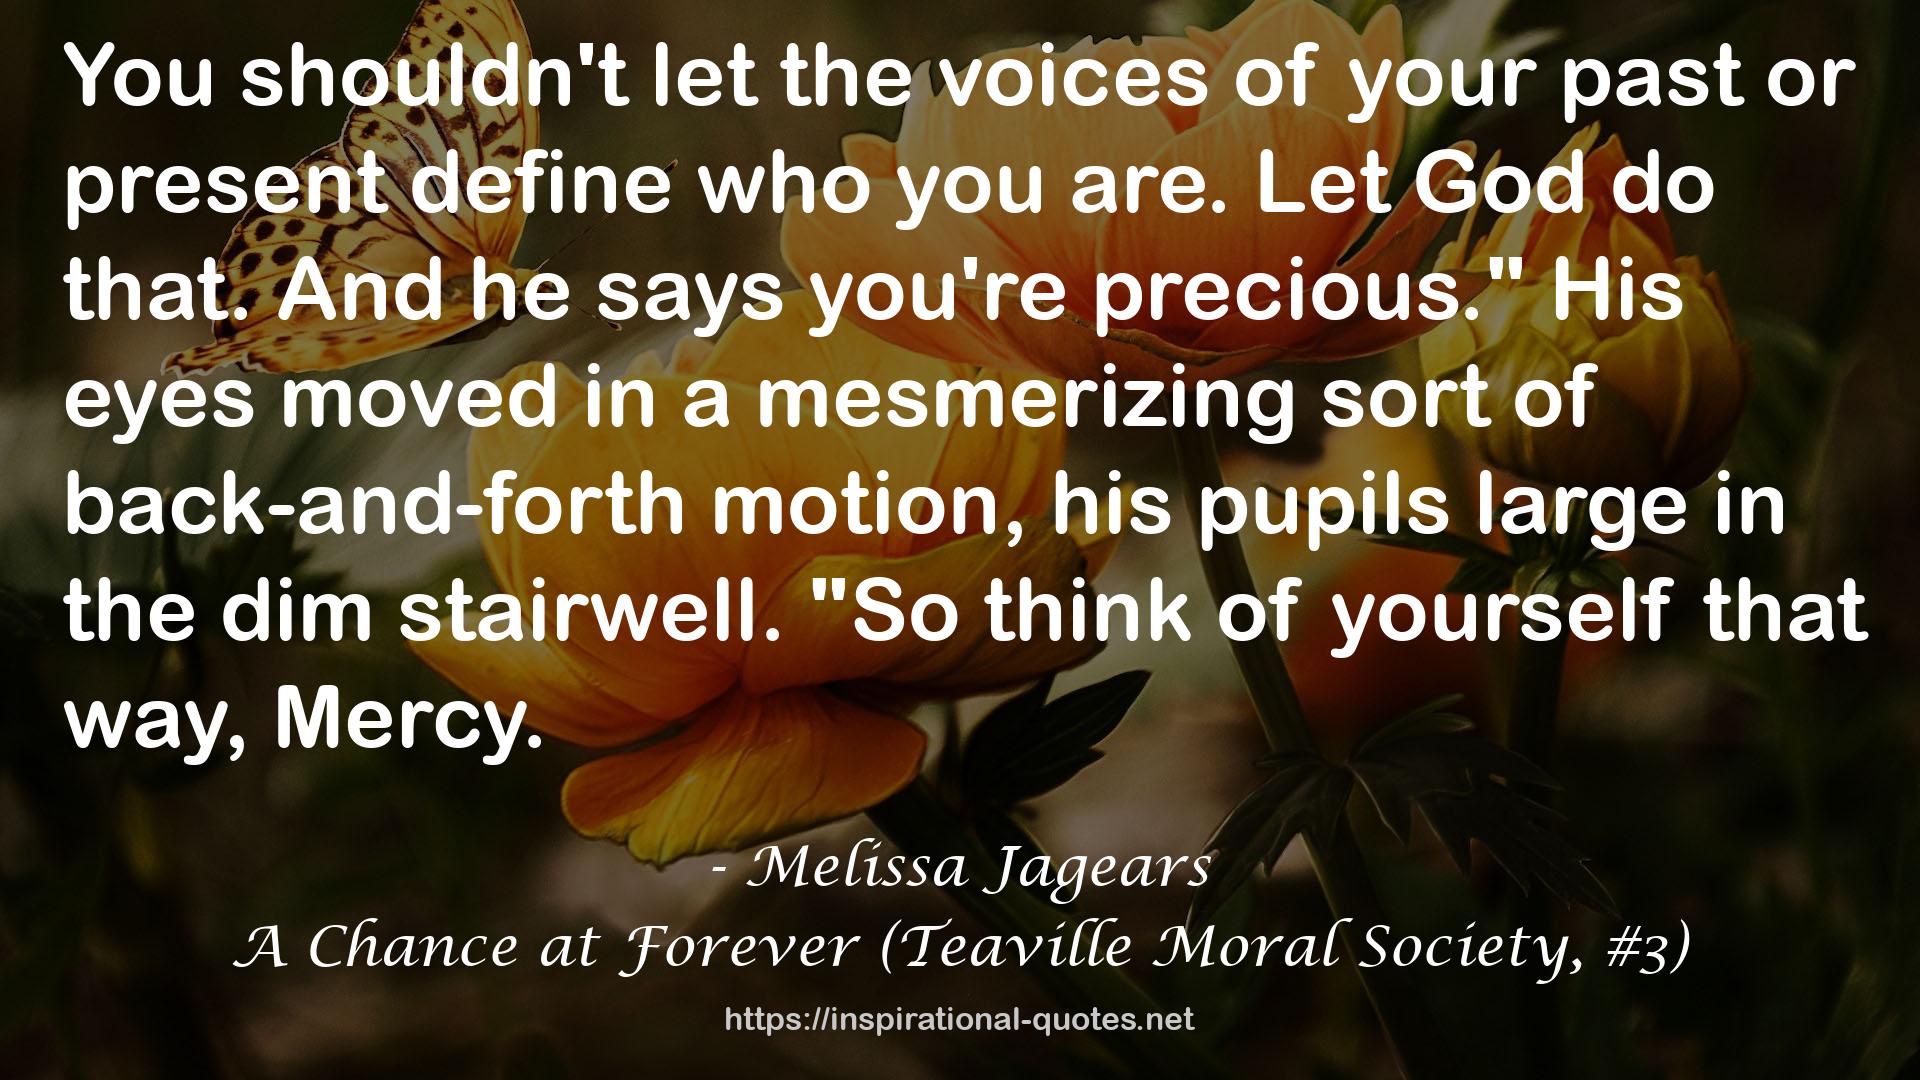 A Chance at Forever (Teaville Moral Society, #3) QUOTES